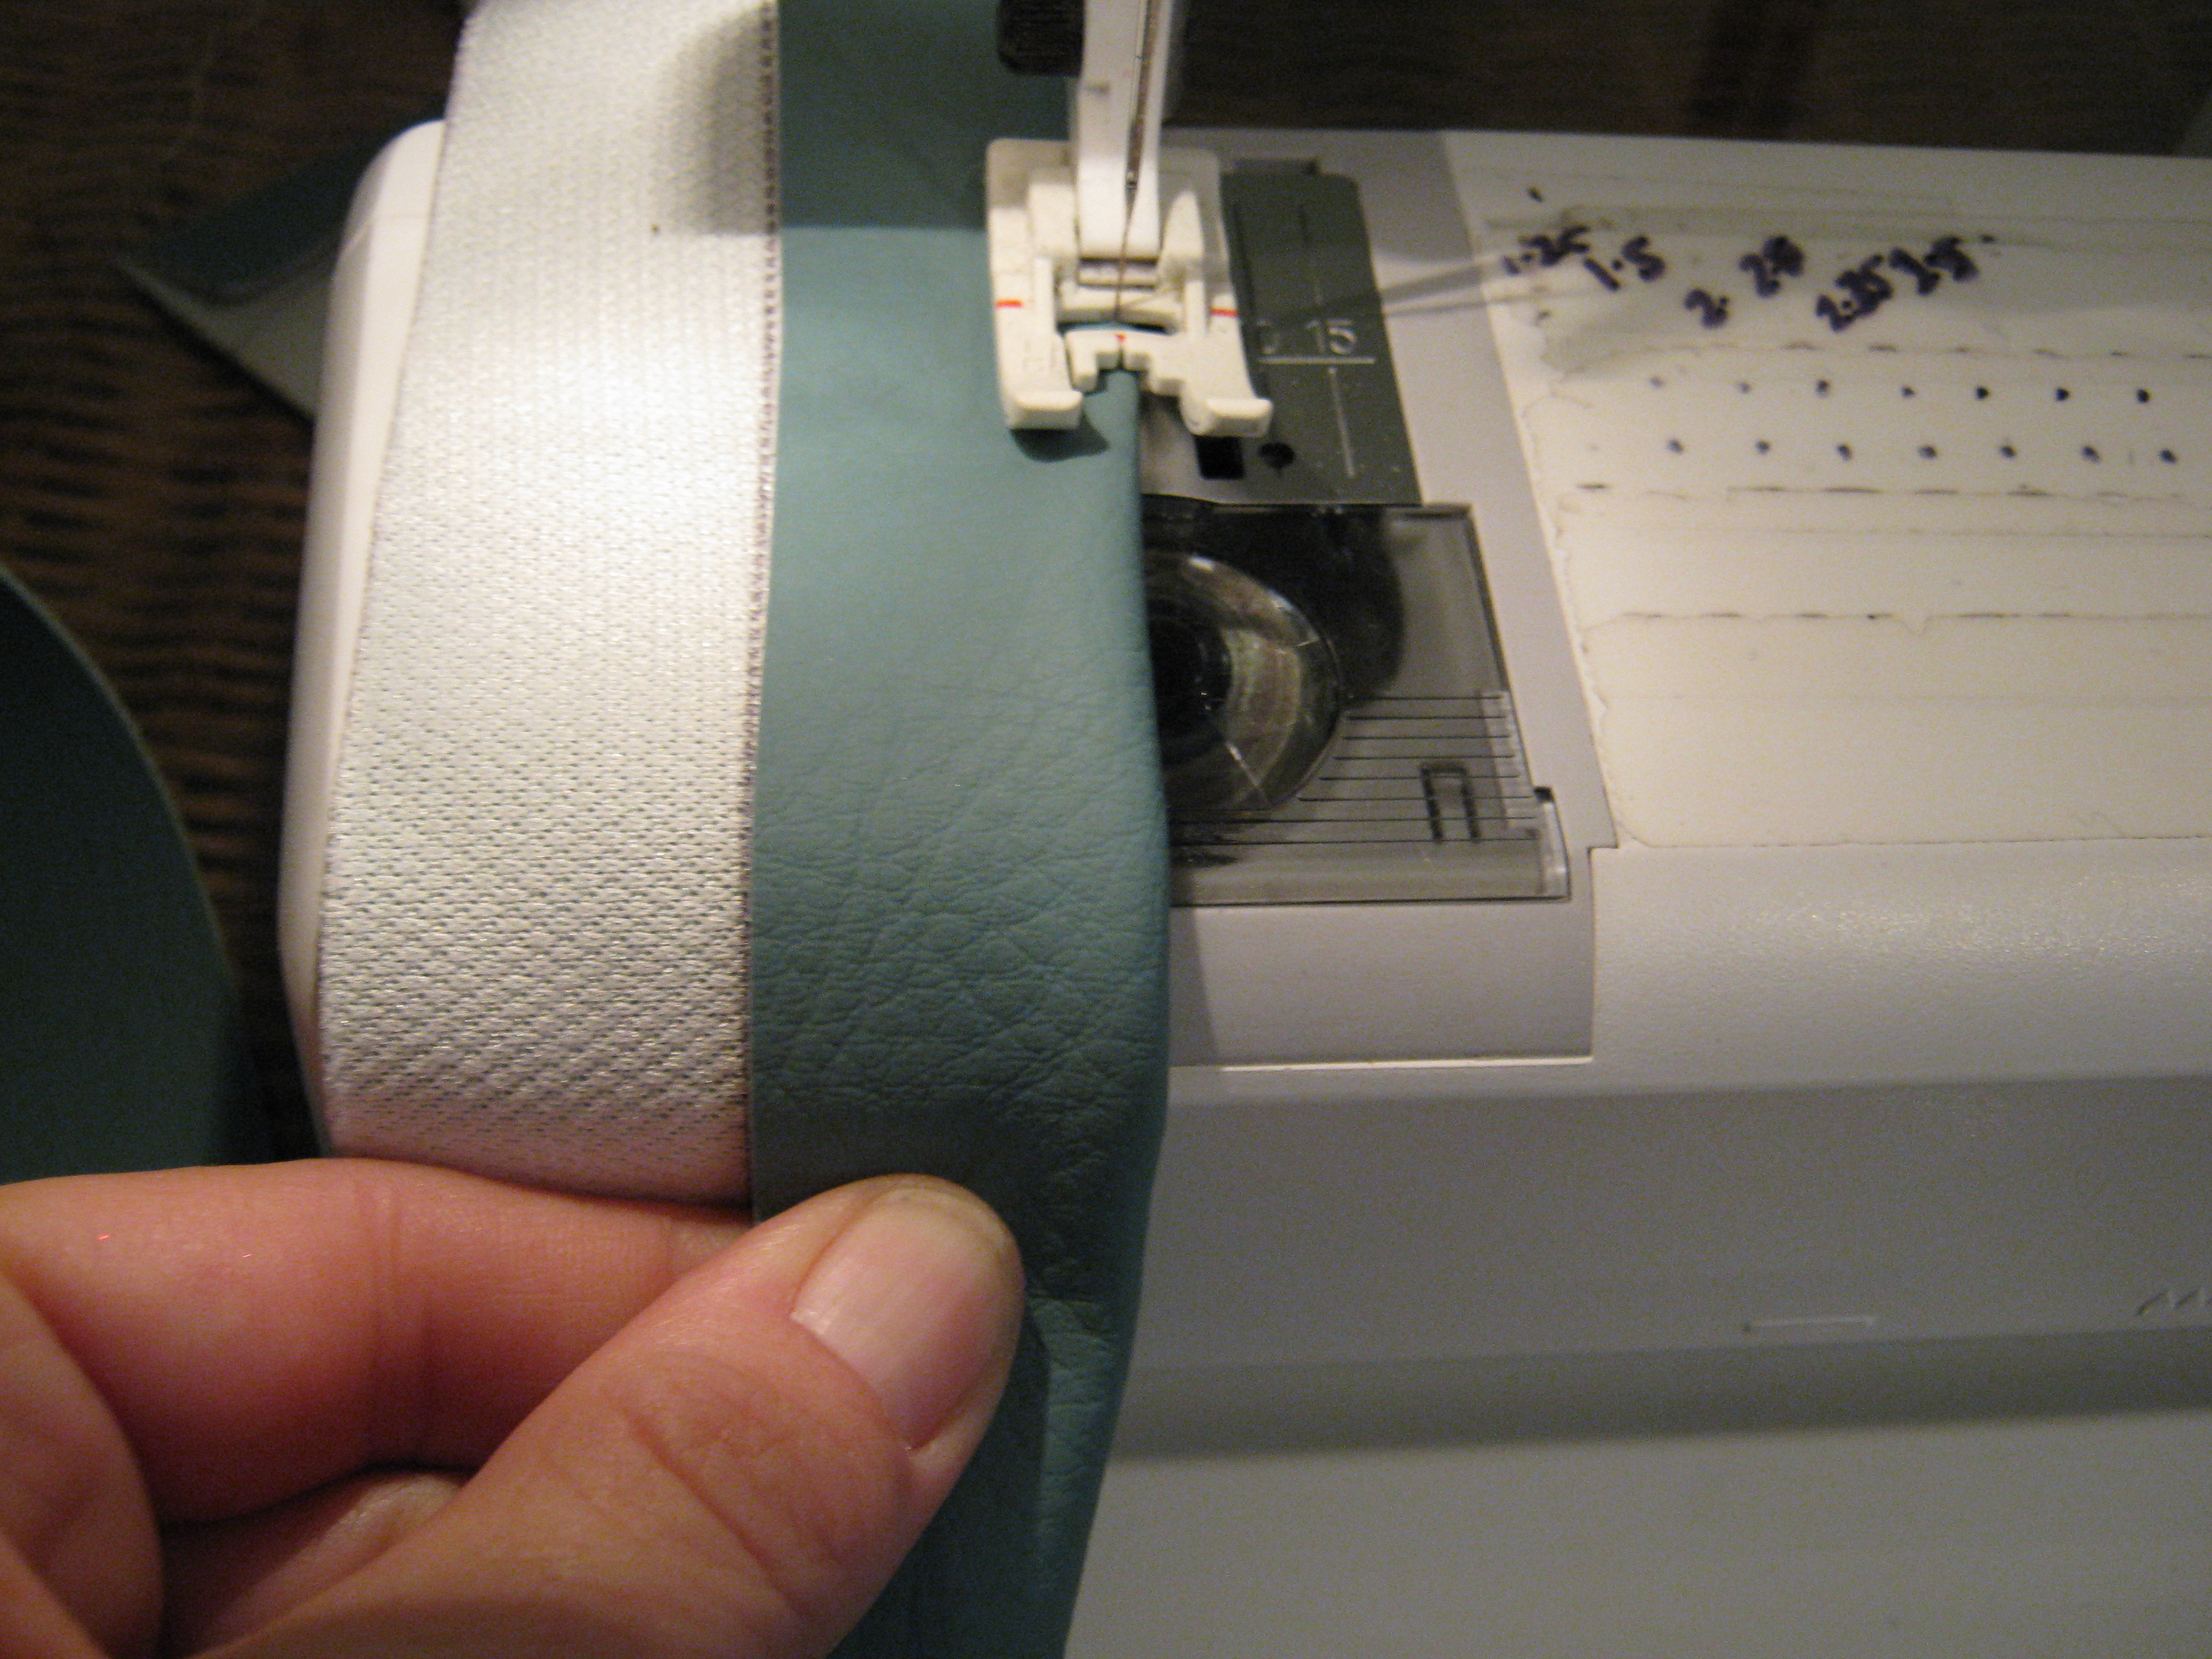 Now you fold the edge of the pleather to the line to start your first line of stitching.  I have decided that the next blog cast will be a full set of instructions to fully sew the pleather strap!!!